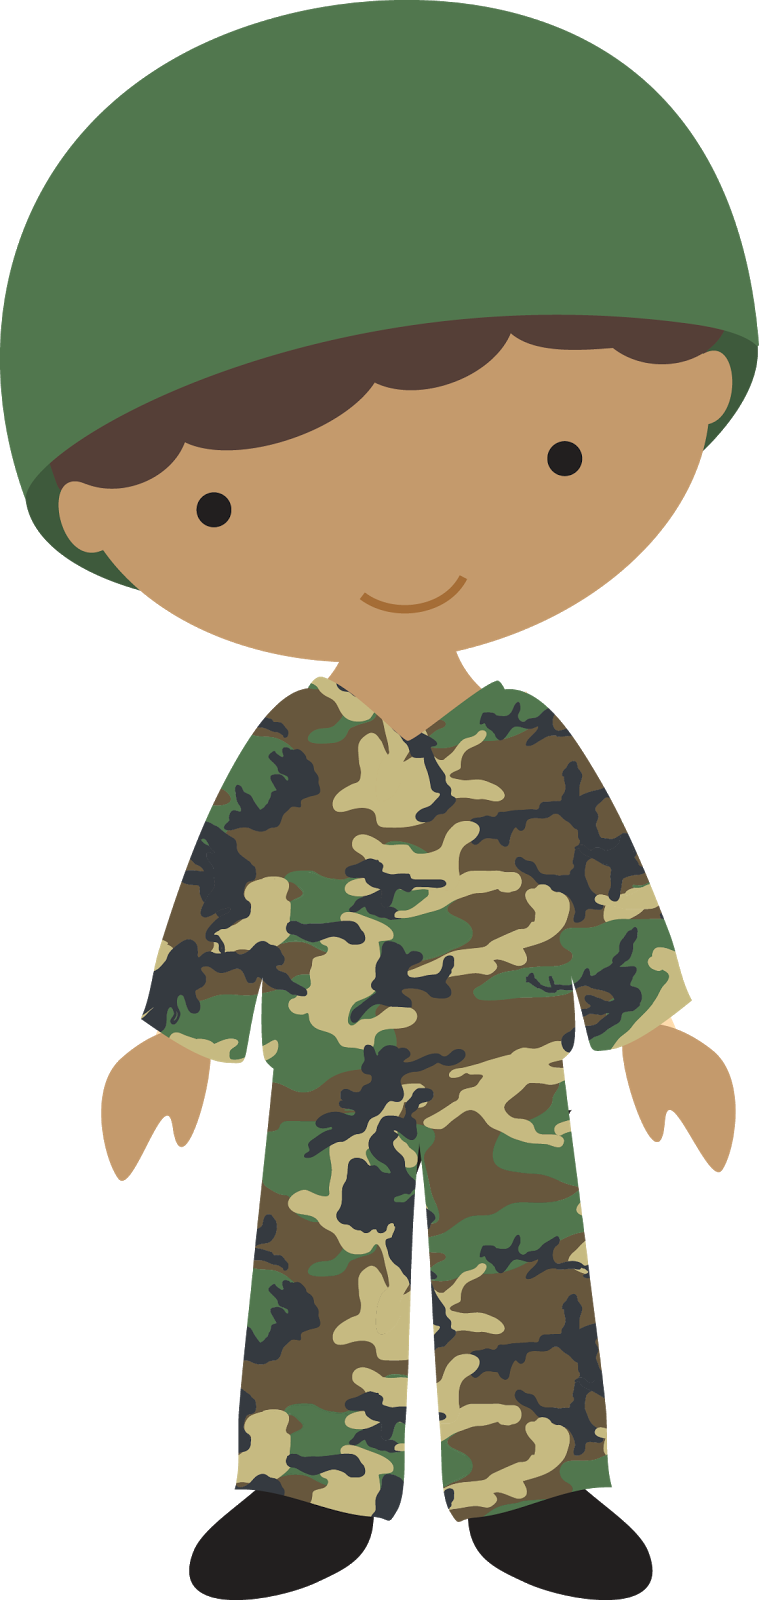 Military soldier clip art clipart download - Cliparting.com